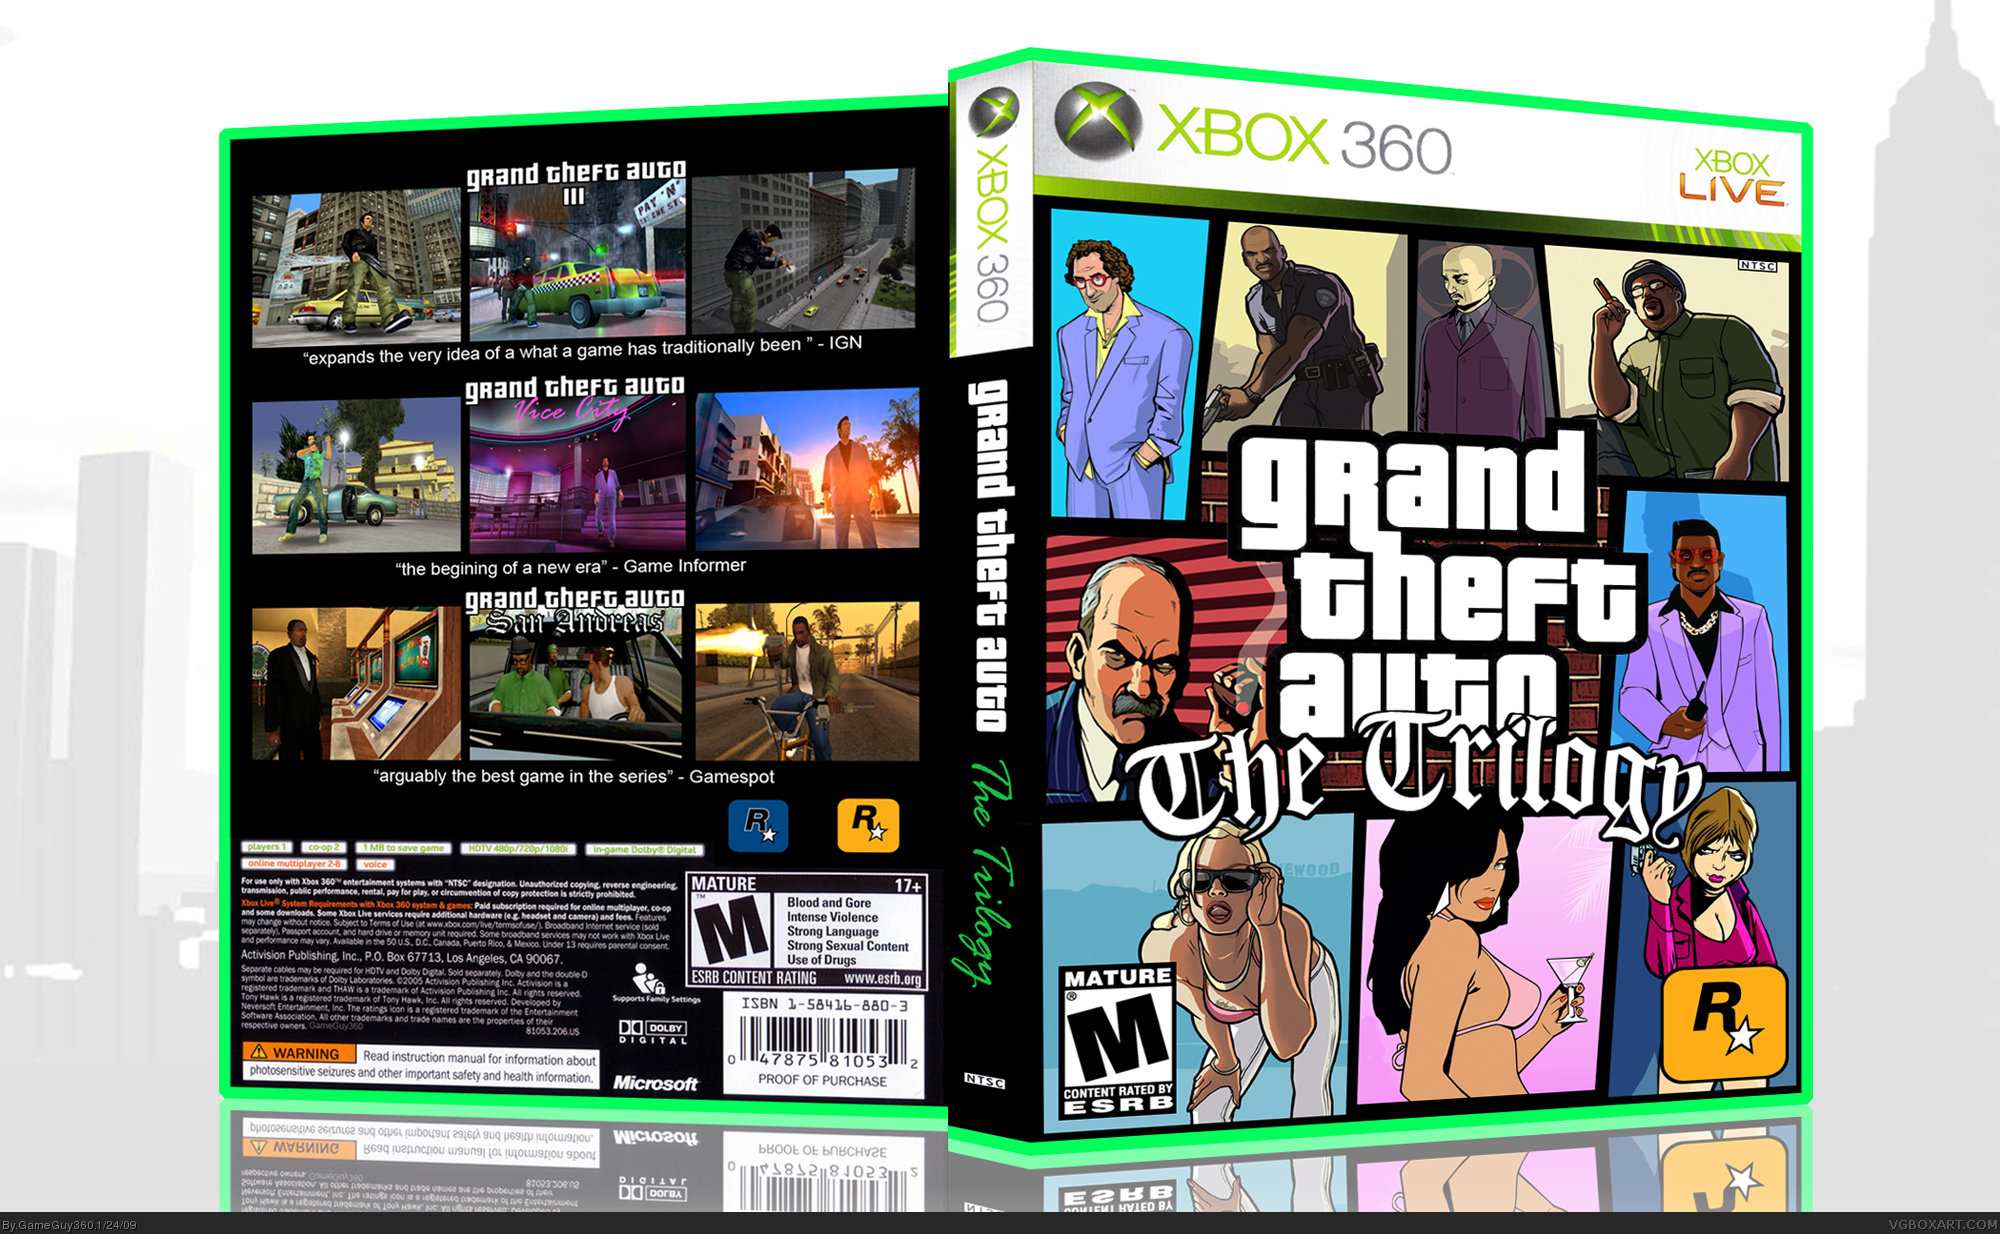 download free grand theft auto the trilogy the definitive edition platforms